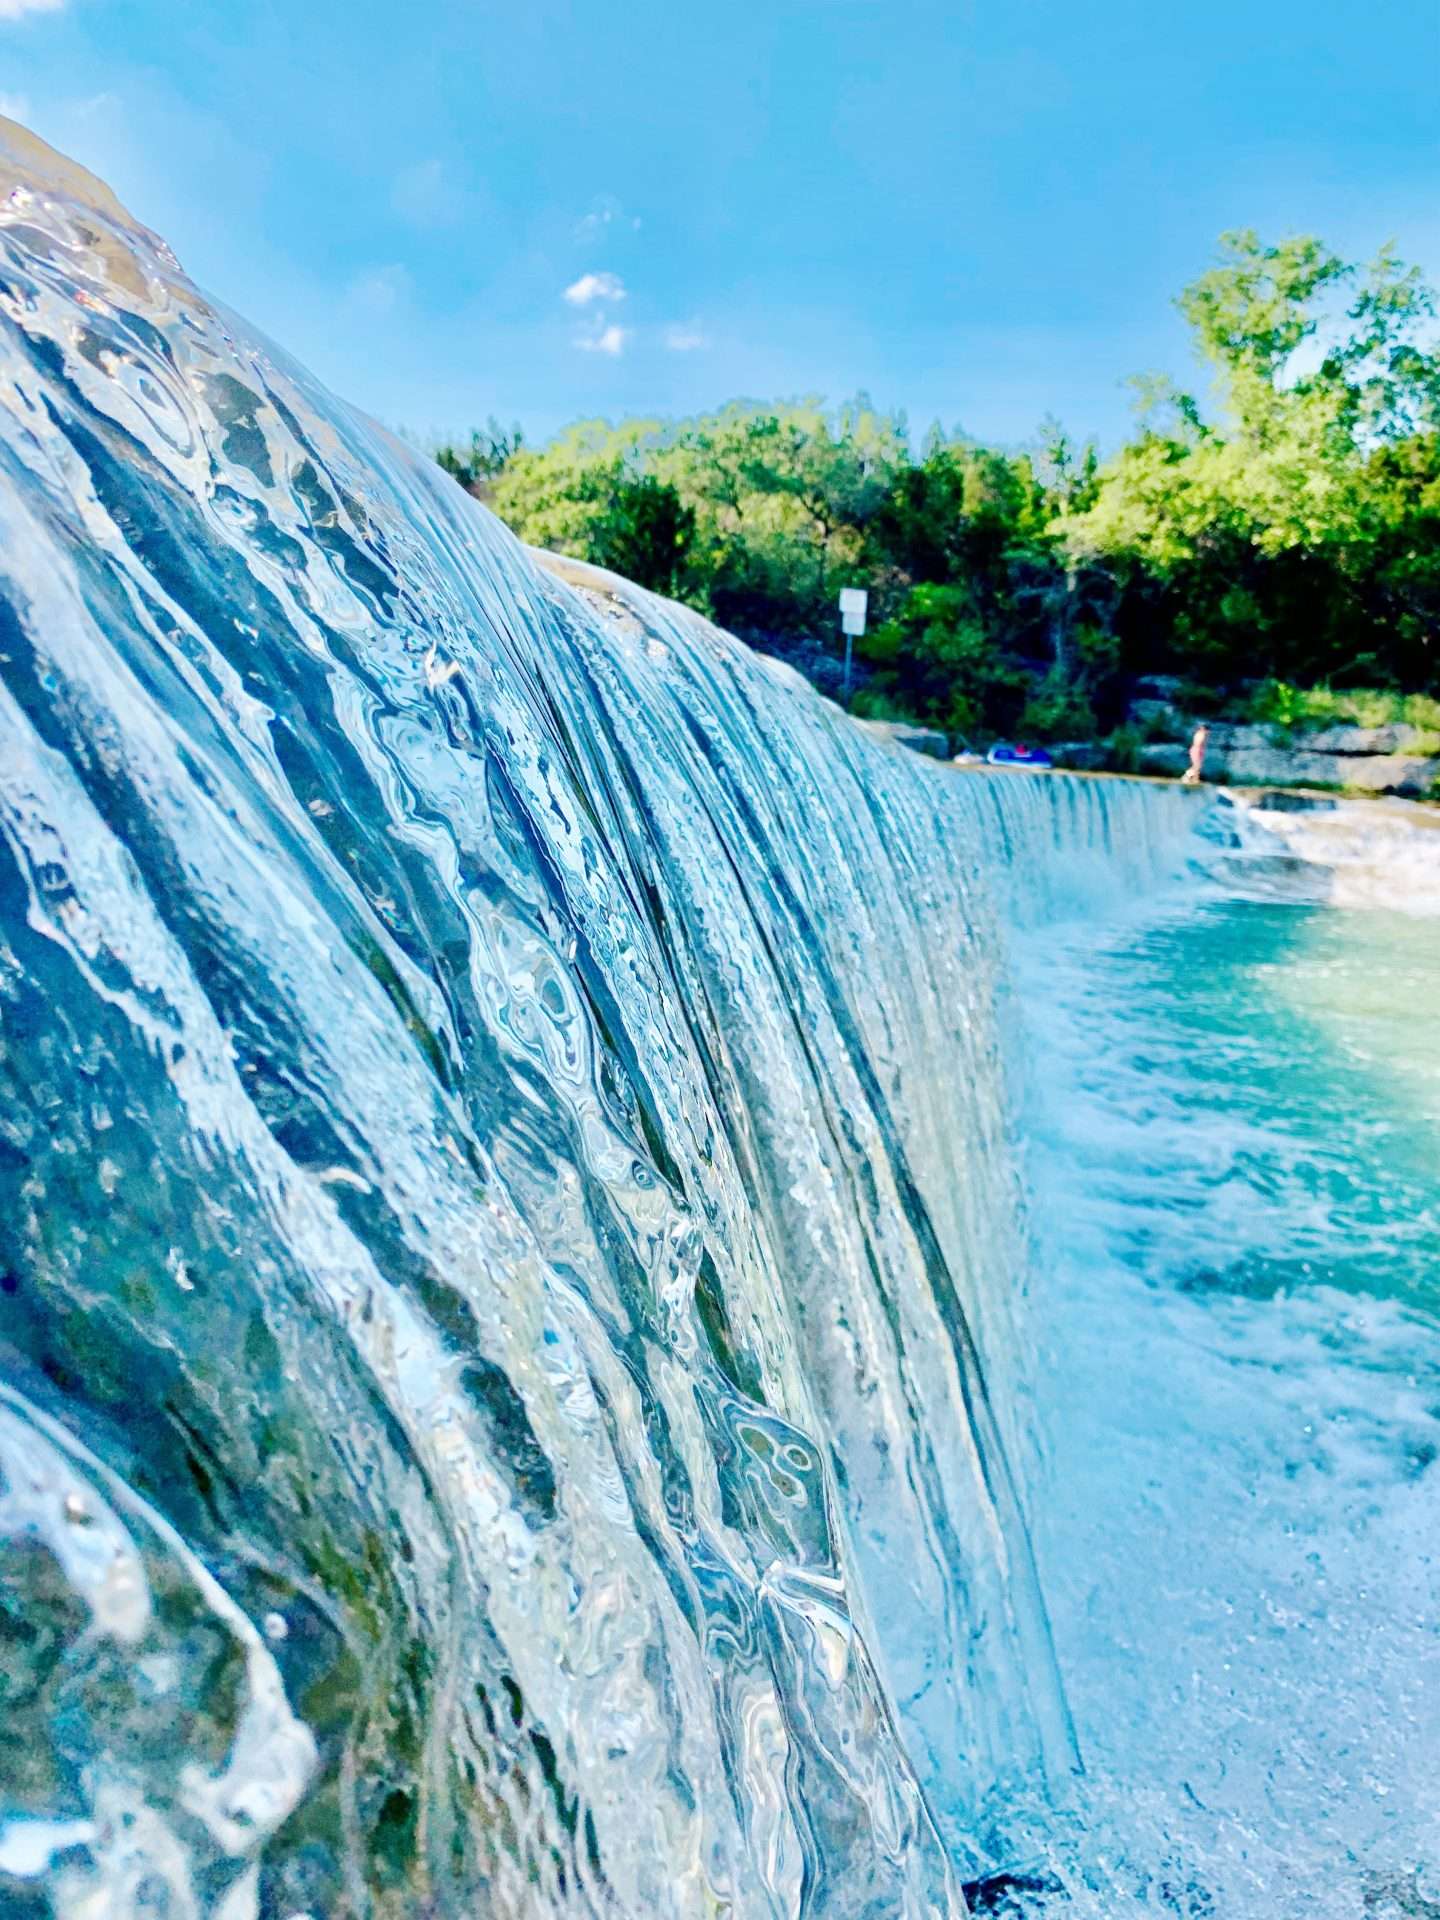 Water flowing over the dam at Blue Hole Park in Georgetown, Texas.